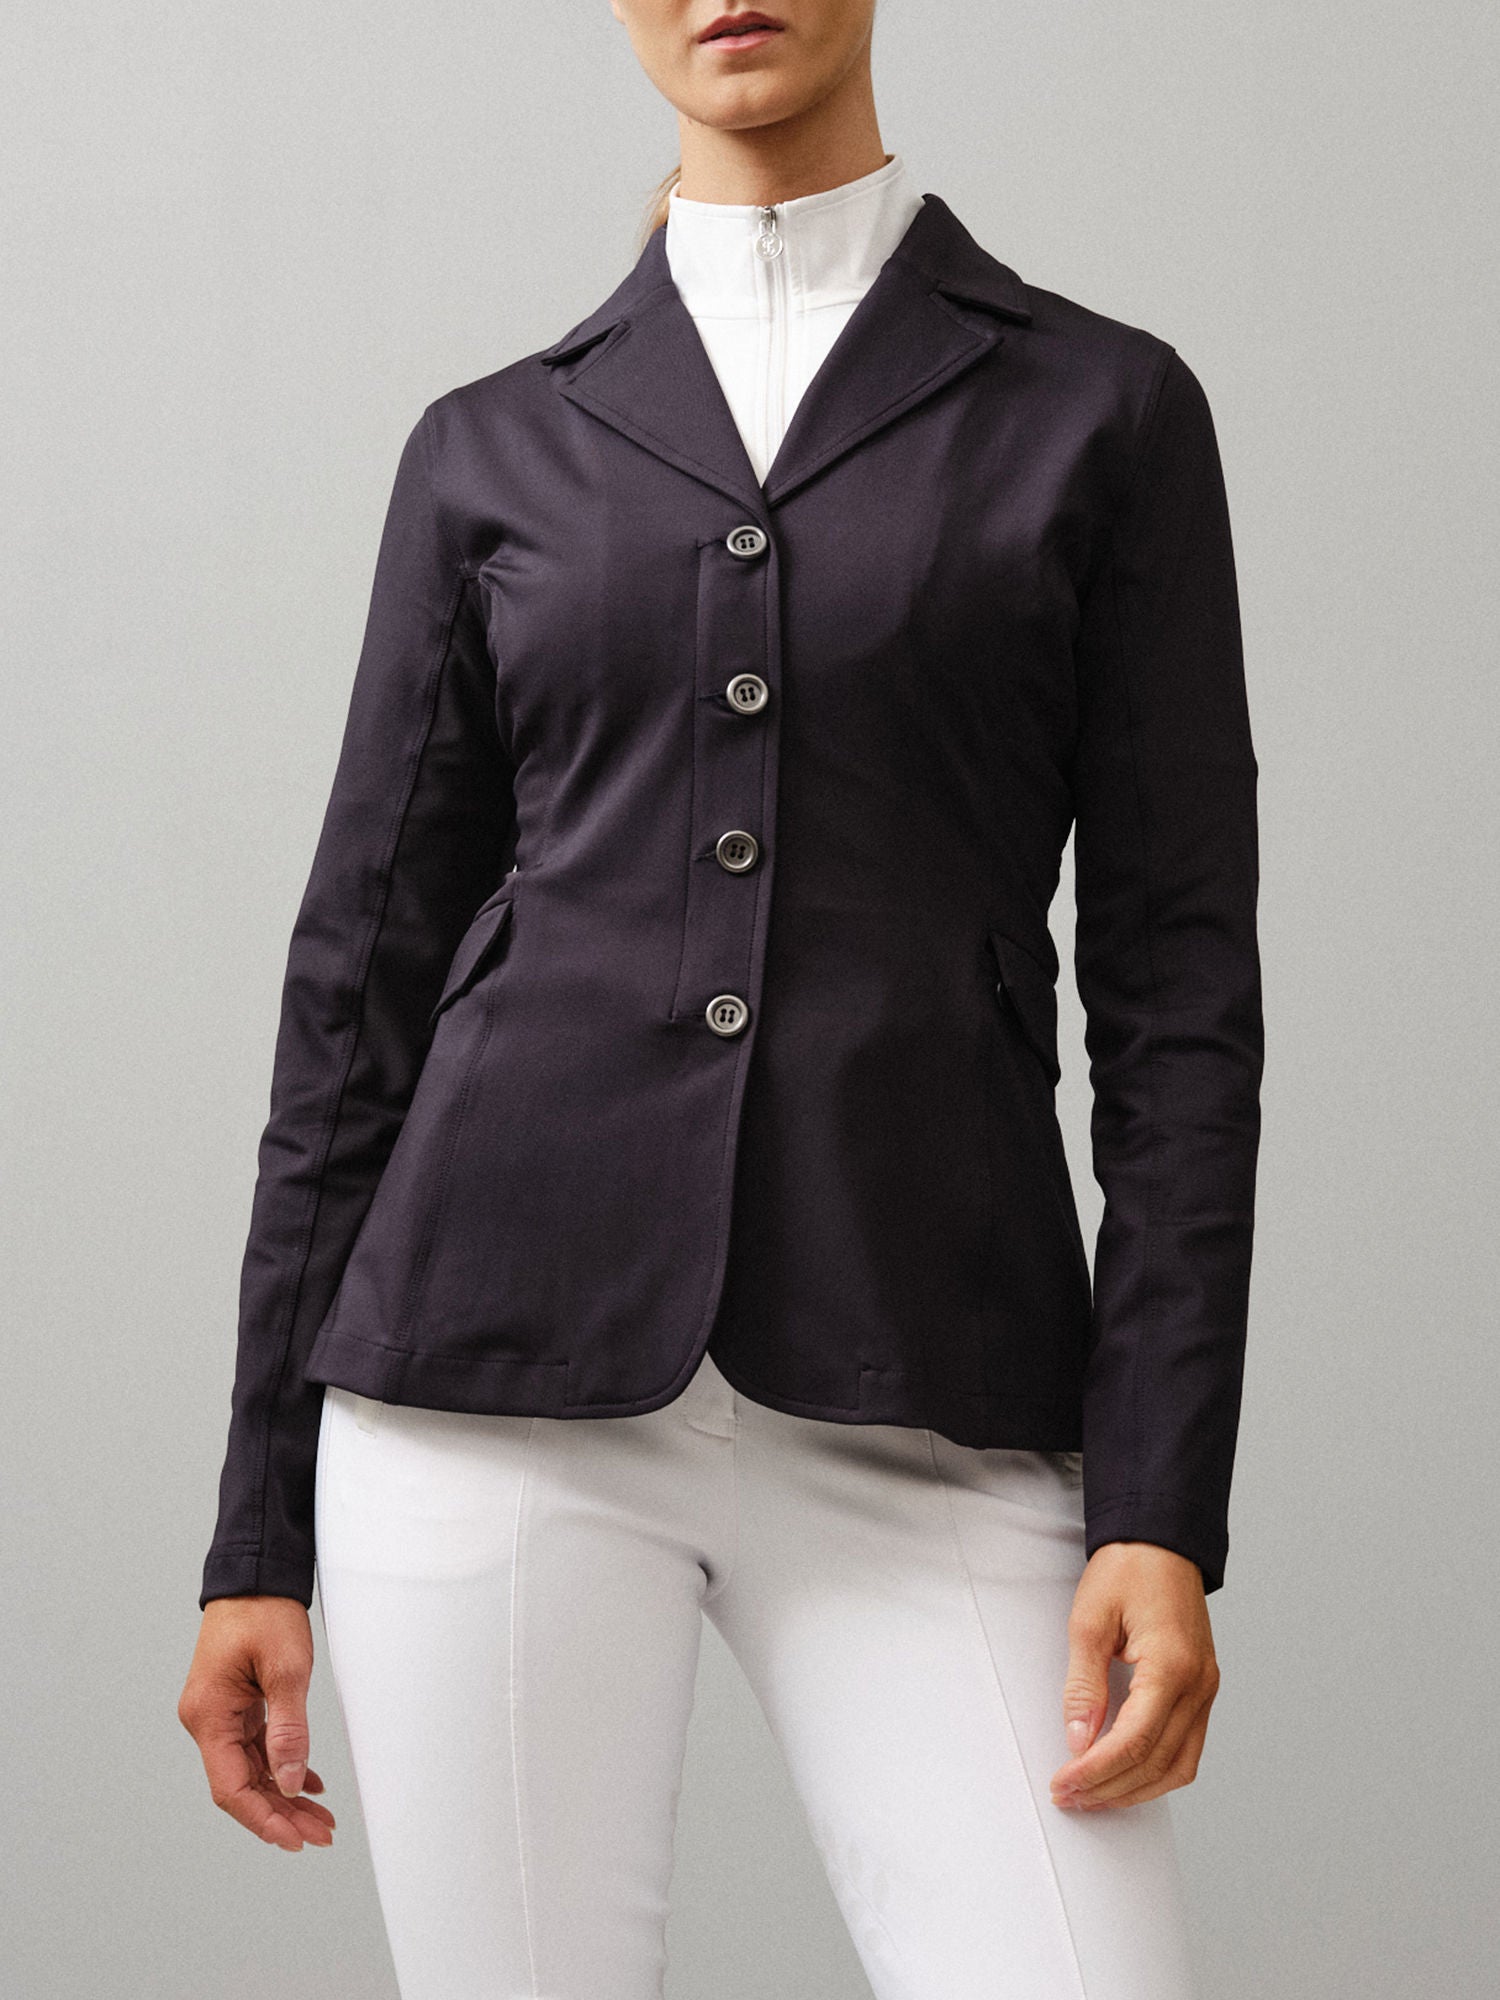 Competition Jacket LYRA Navy ~ ON SALE!